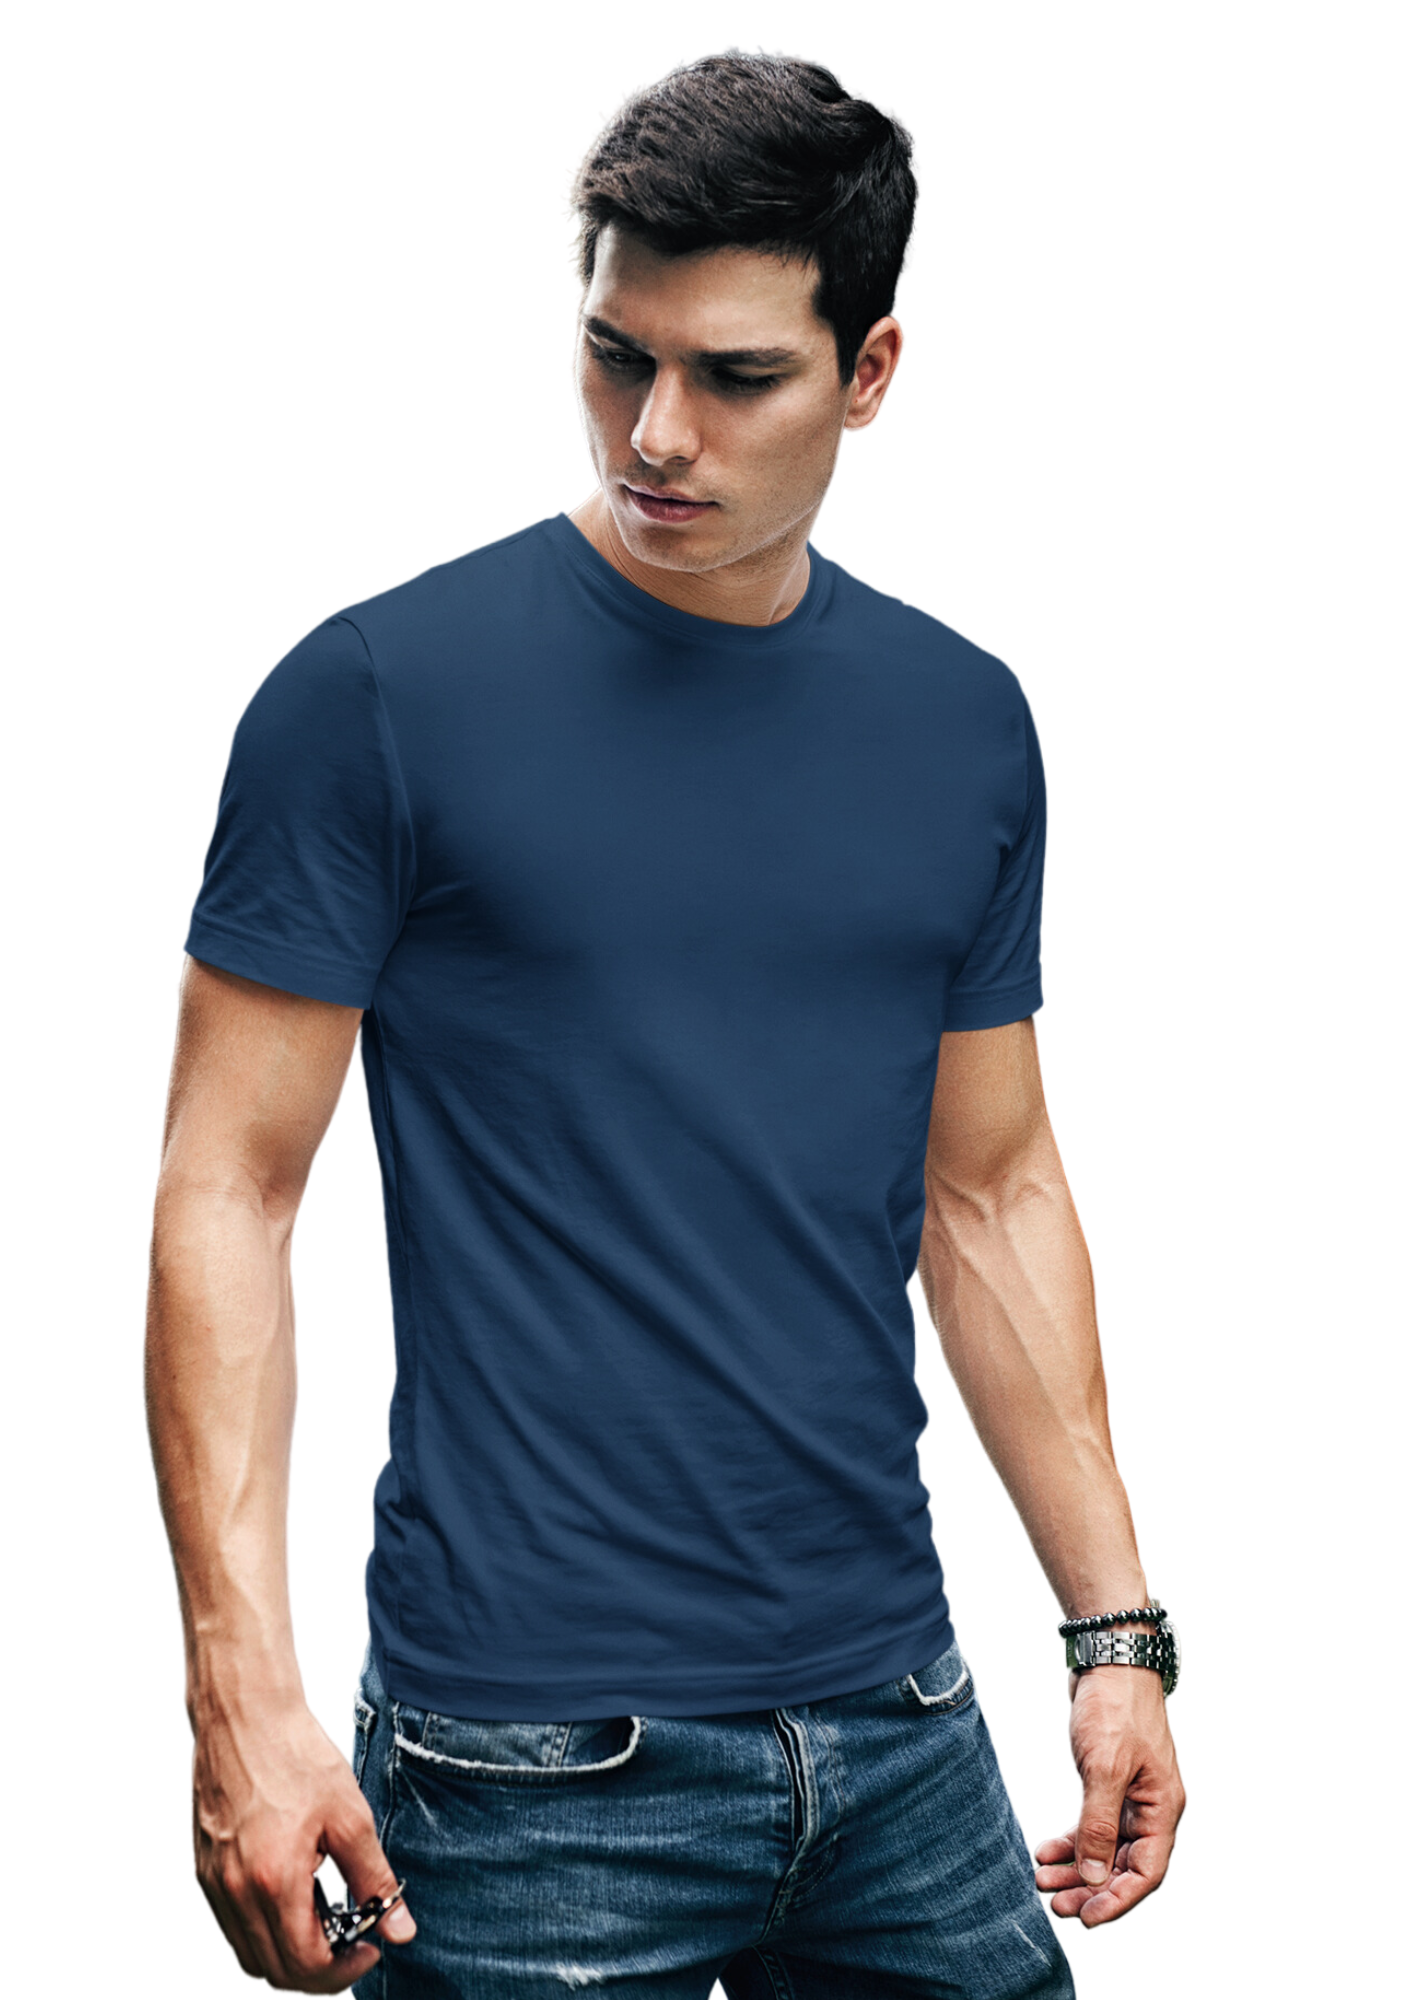 100% Compacted Combed Cotton Black, White, Navy 3 T-shirts